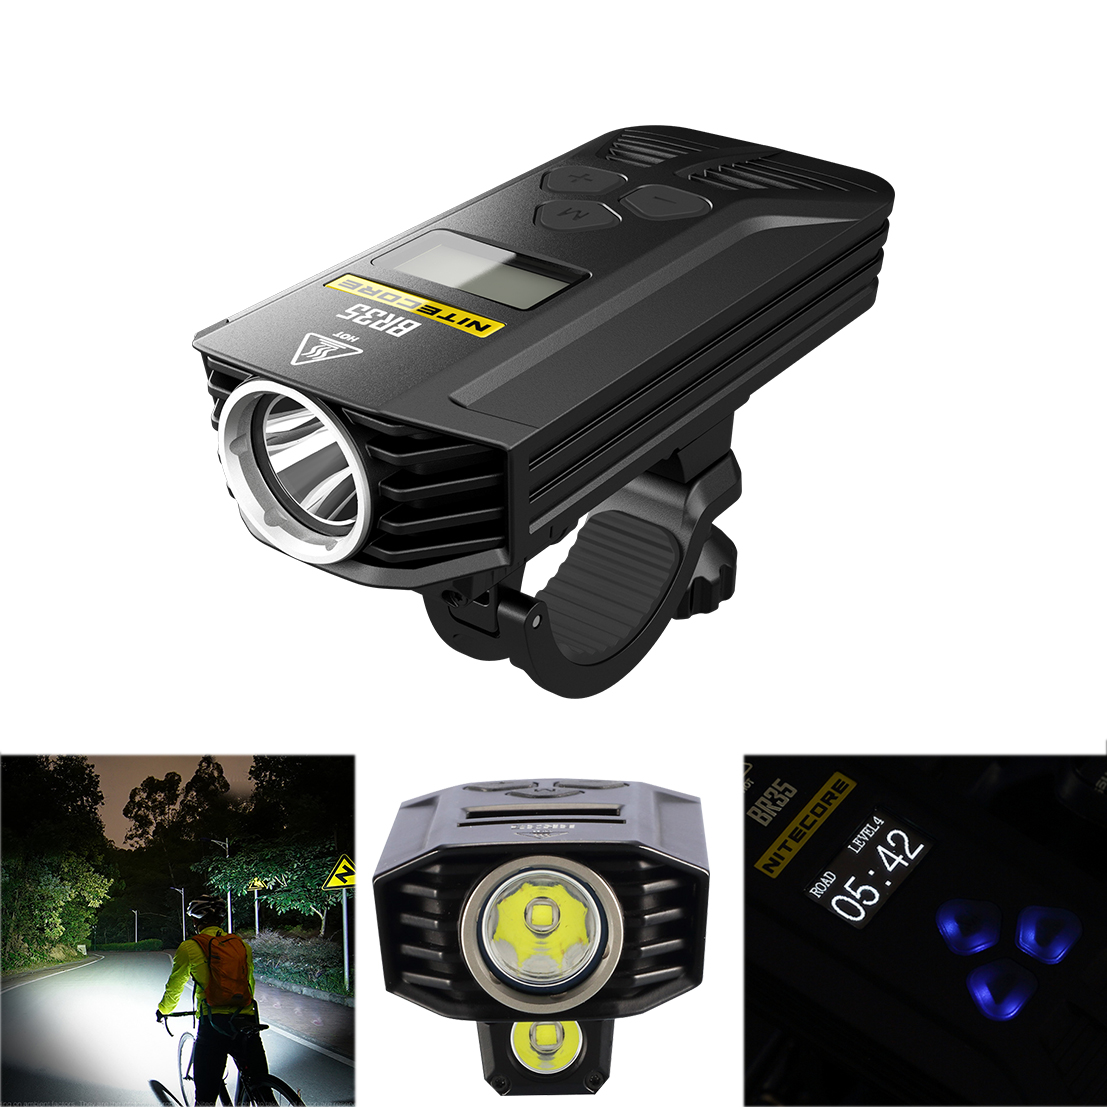 

Nitecore BR35 1800LM 2x 2 U2 OLED Display Dual Distance Beam 6800mAh Lithium Battery Rechargeable Bike Front Light